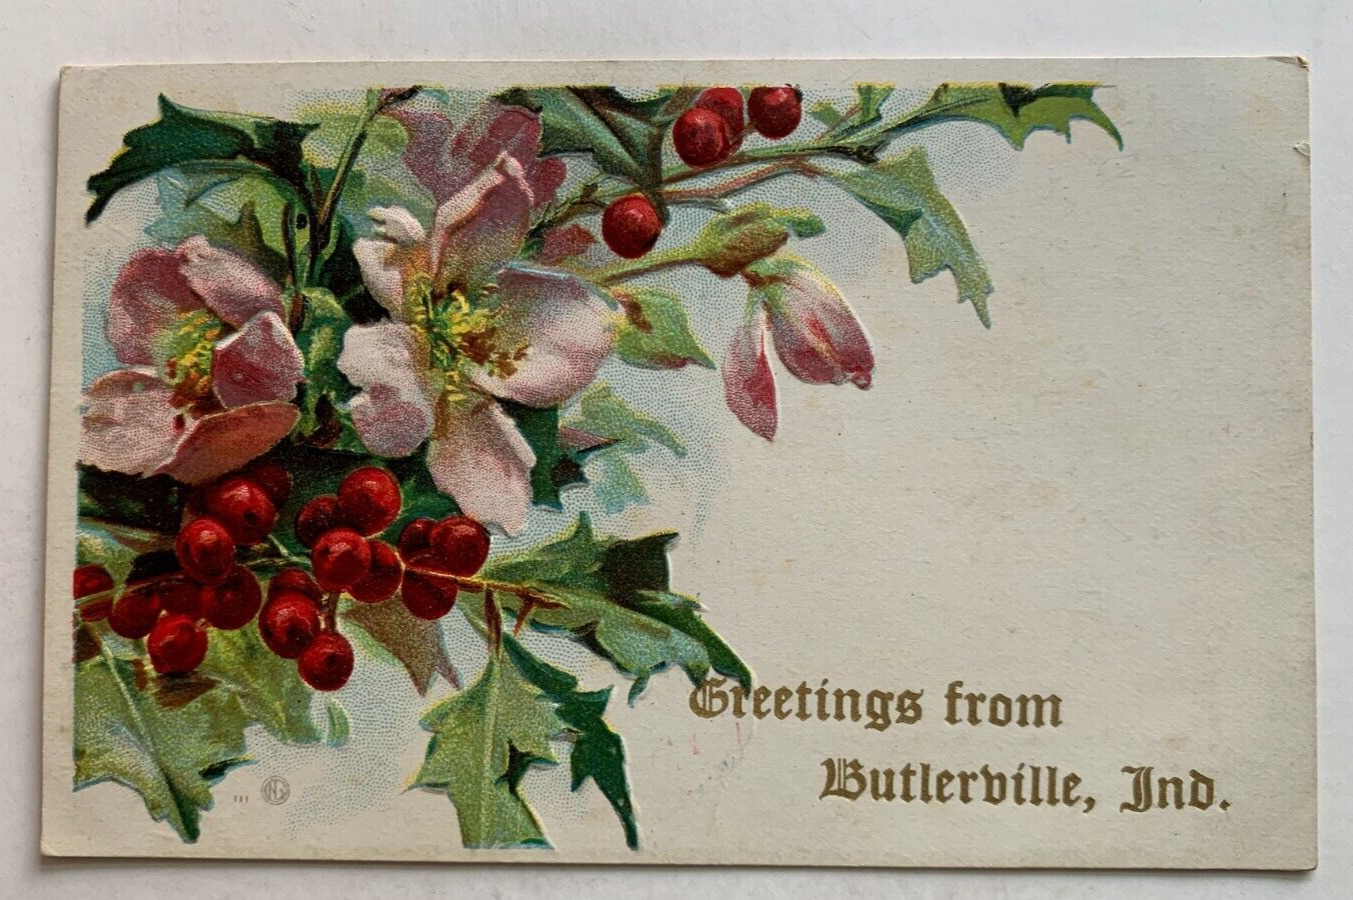 c 1900s Indiana Postcard Greetings from Butlerville Ind vintage embossed flowers